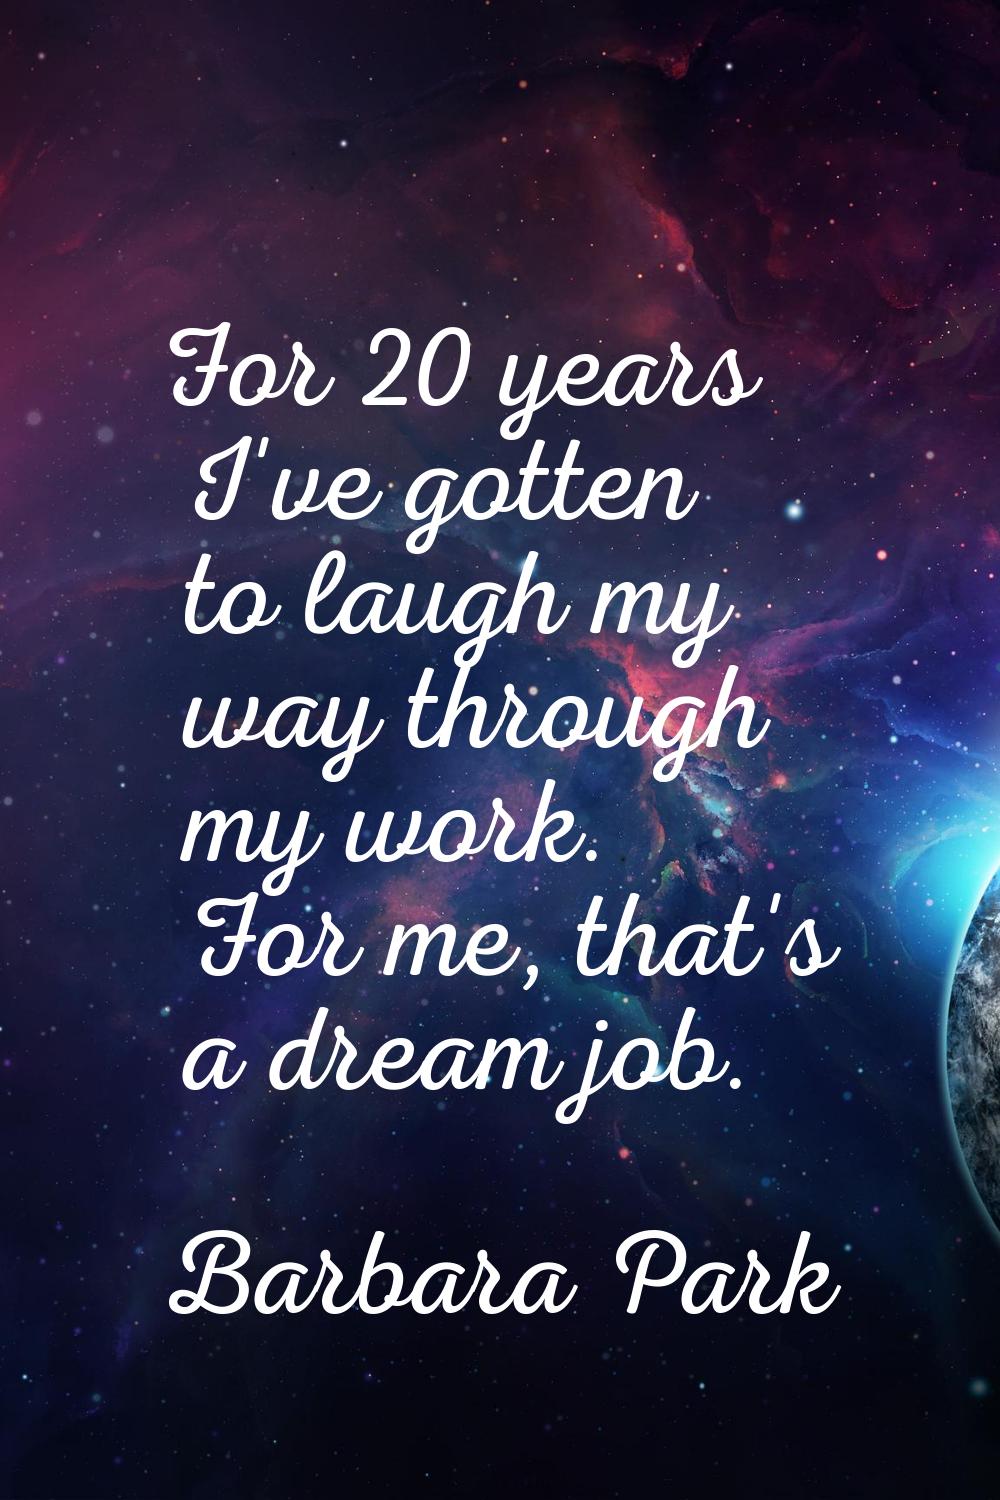 For 20 years I've gotten to laugh my way through my work. For me, that's a dream job.